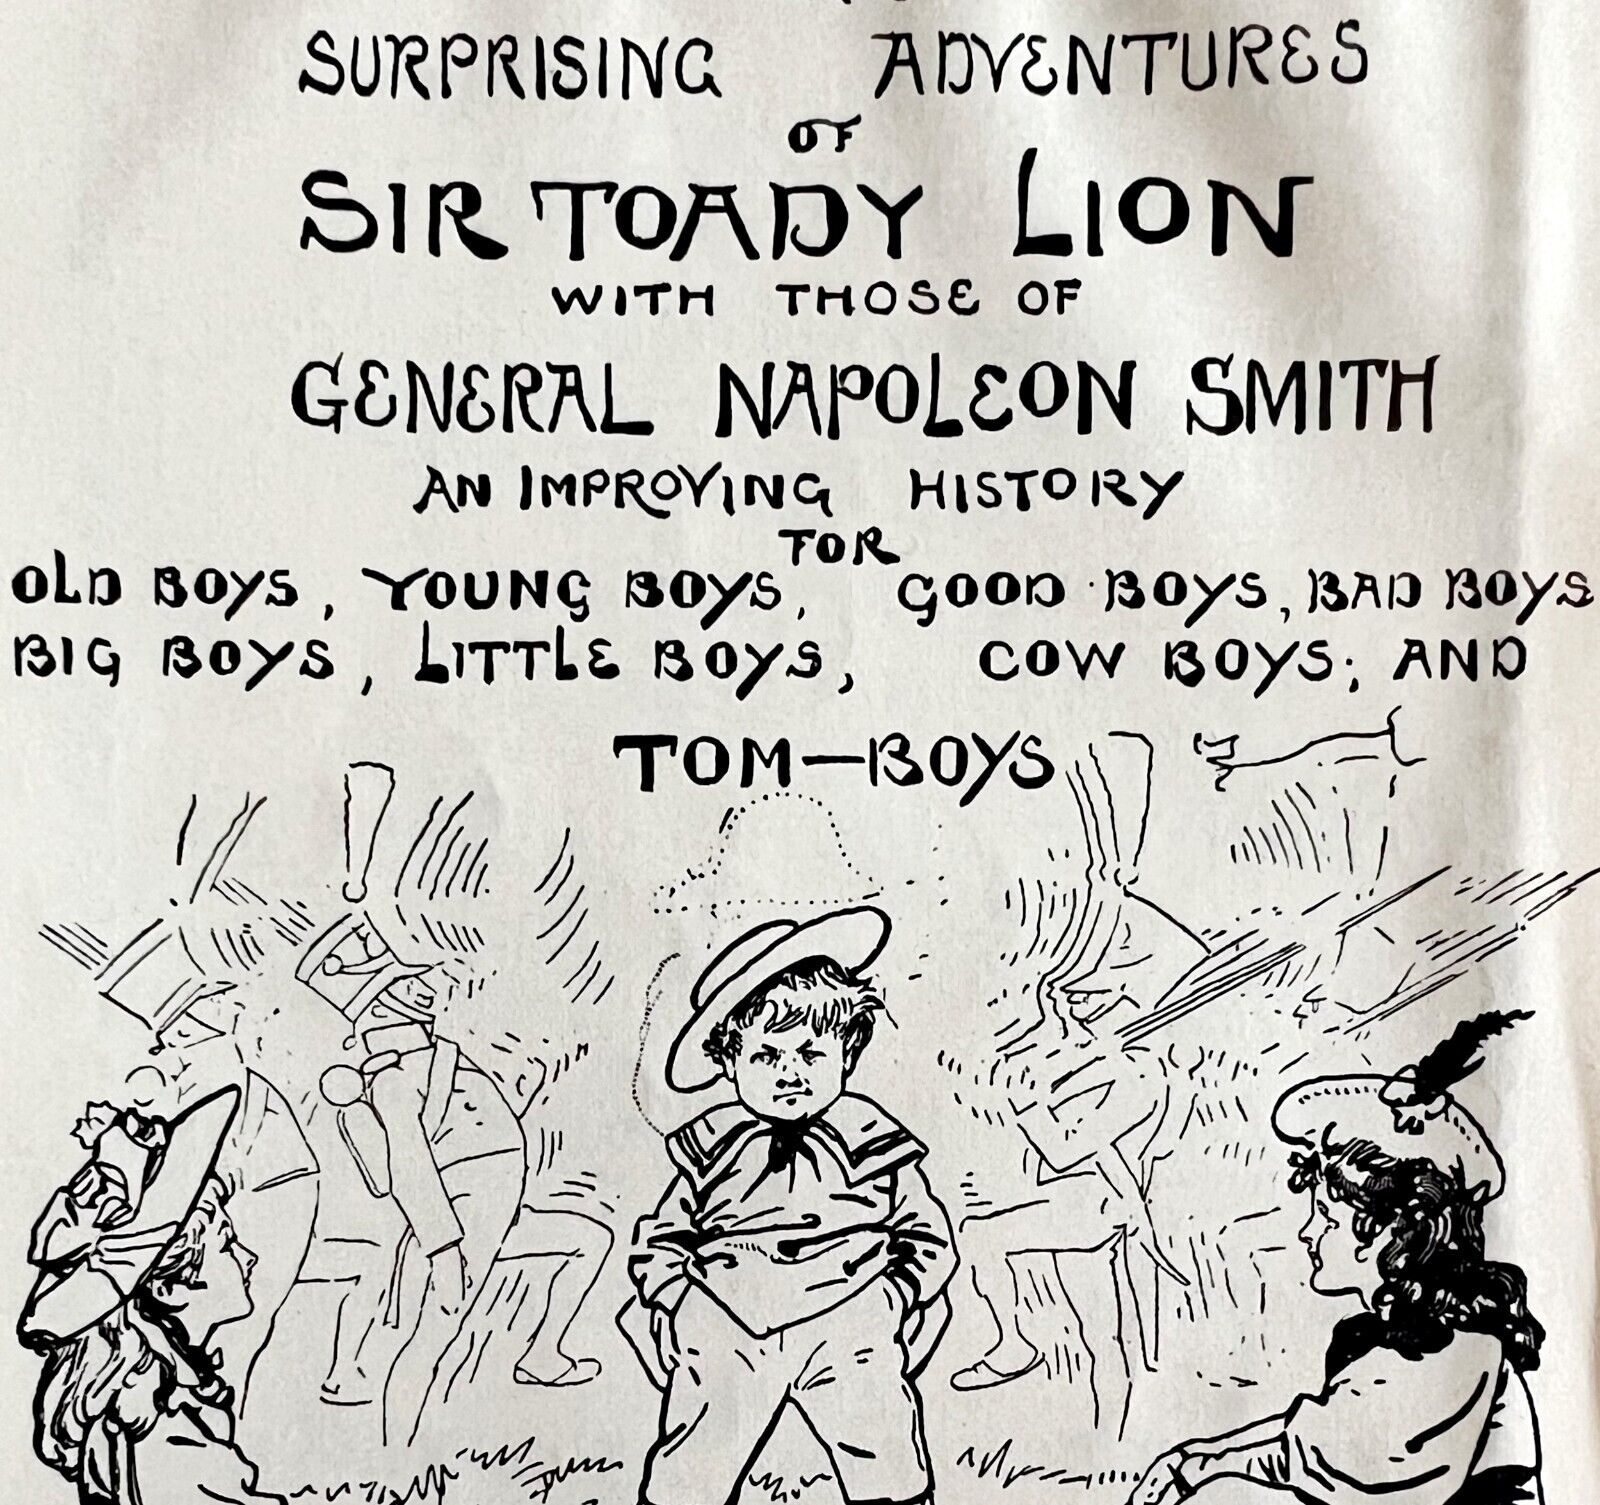 Sir Toady Lion 1897 Advertisement Victorian General Napoleon Smith DWFF11